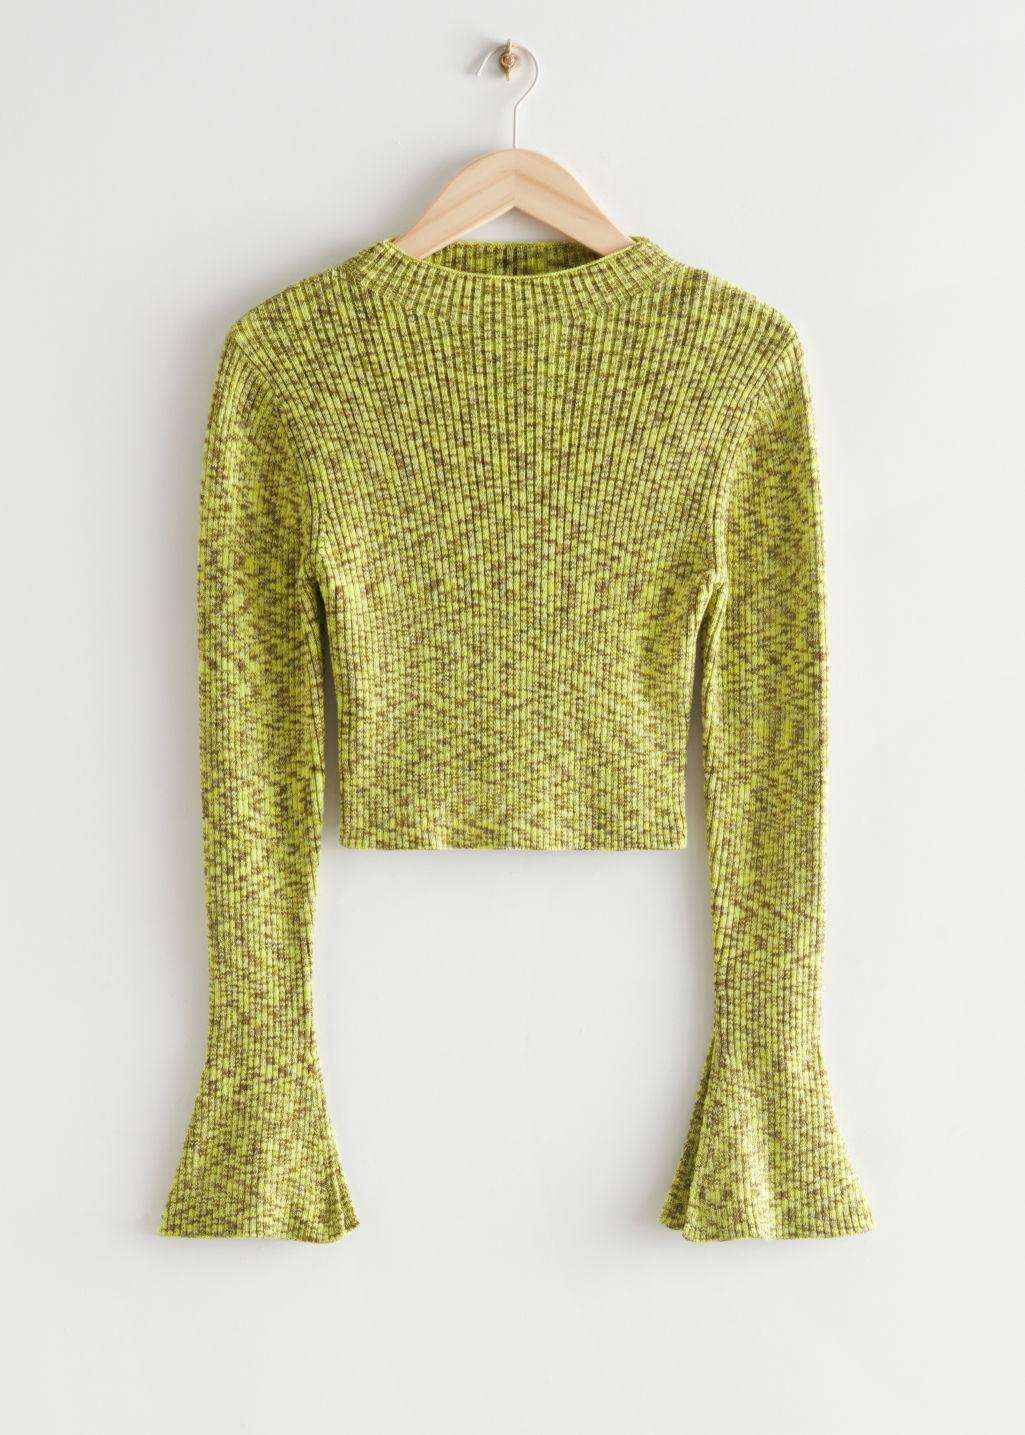 & Other Stories Flared Cuff Rib Knit Top in Green | Lyst